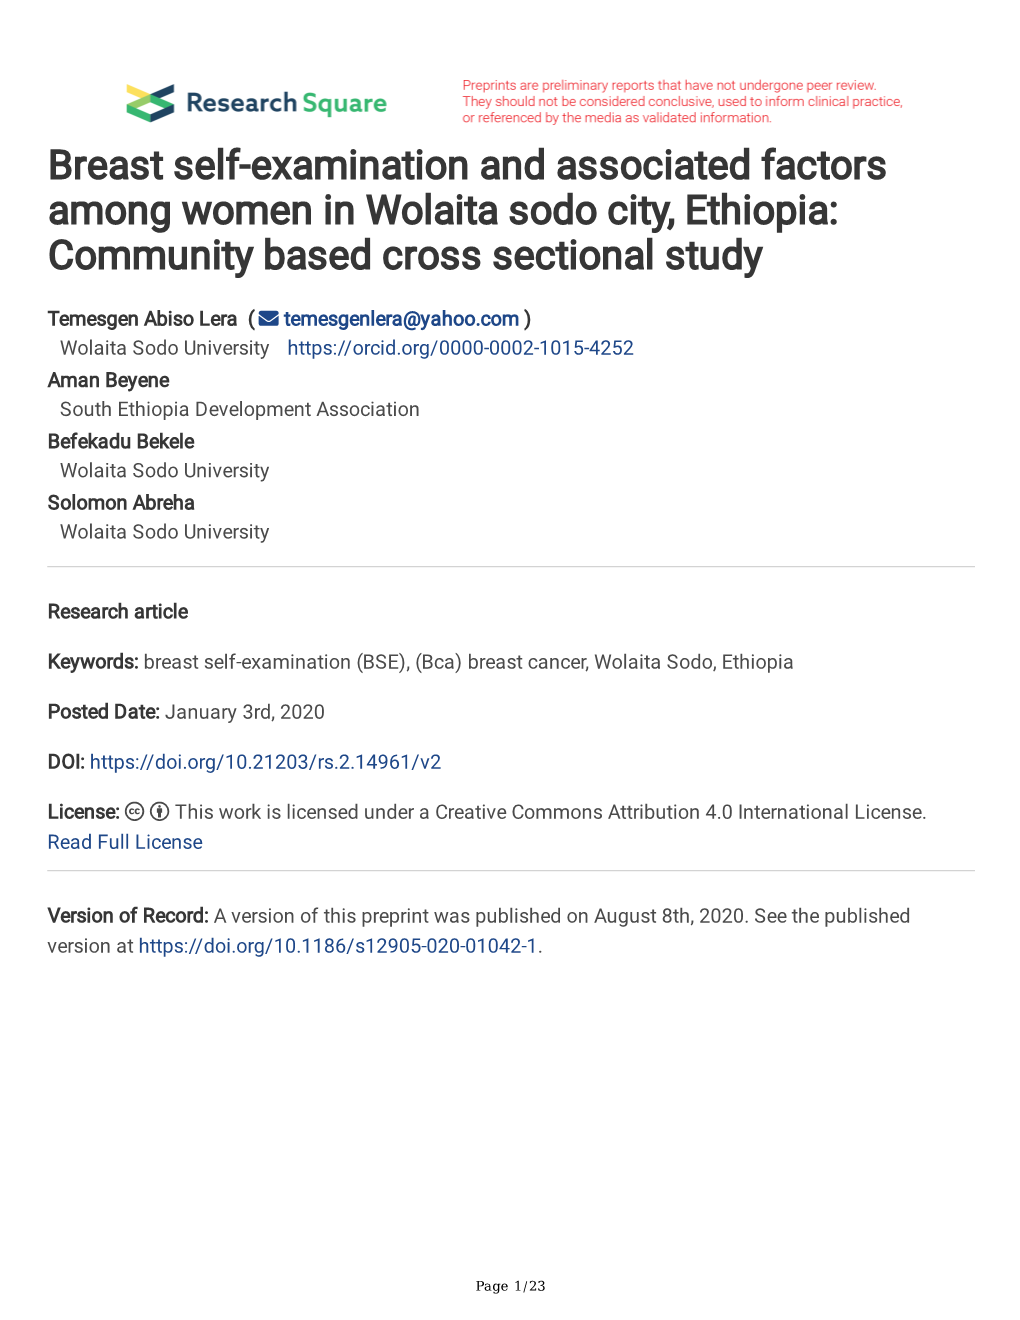 Breast Self-Examination and Associated Factors Among Women in Wolaita Sodo City, Ethiopia: Community Based Cross Sectional Study